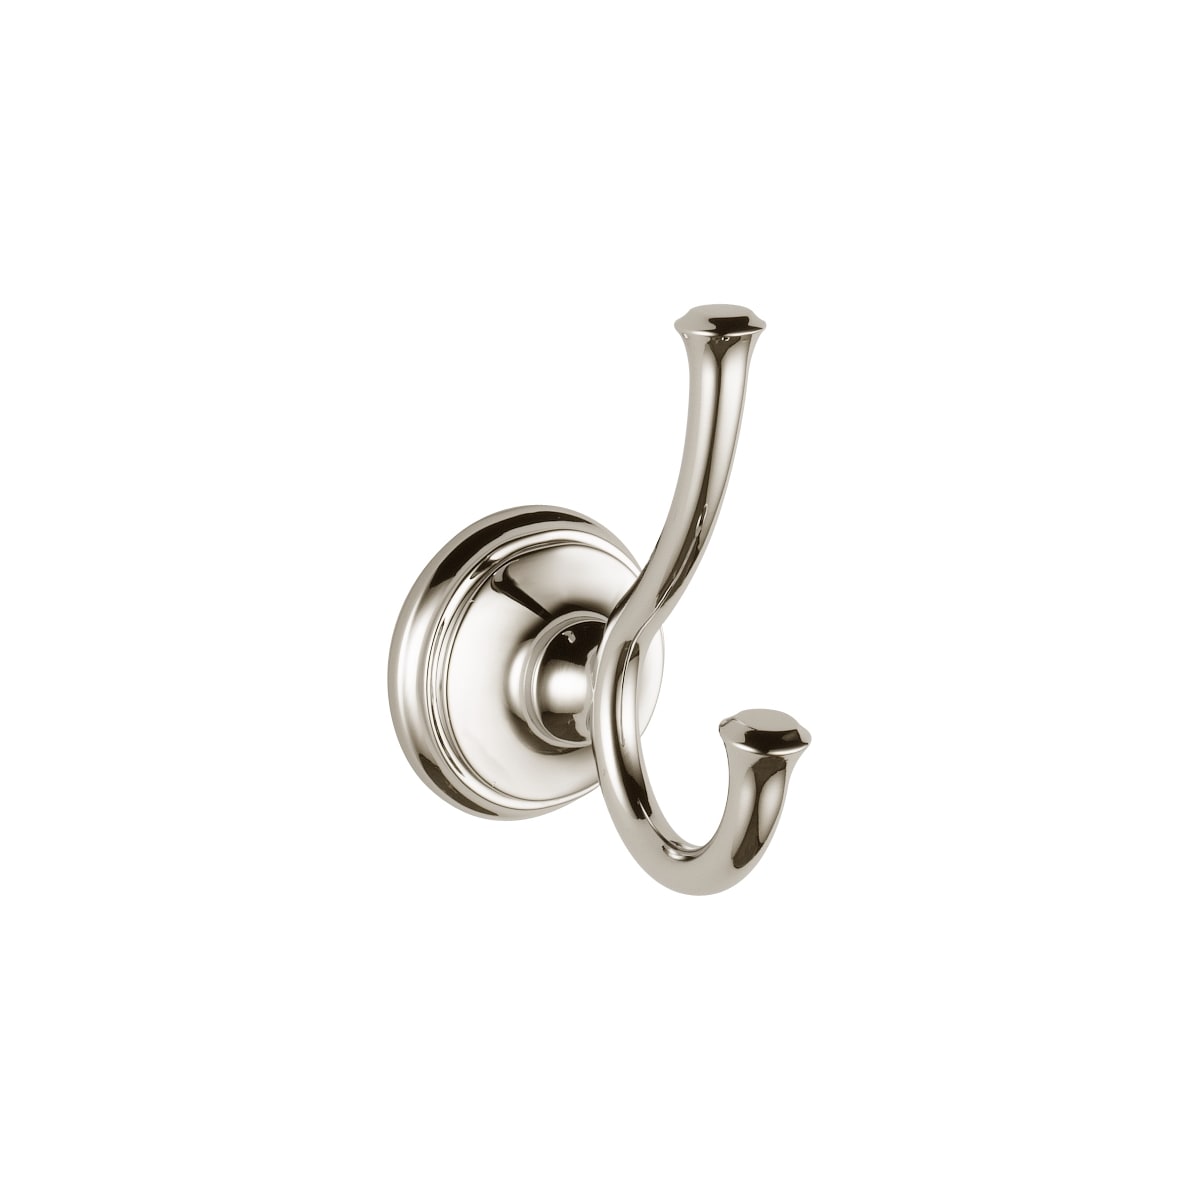 Dryden Double Robe or Towel Hook in Polished Nickel